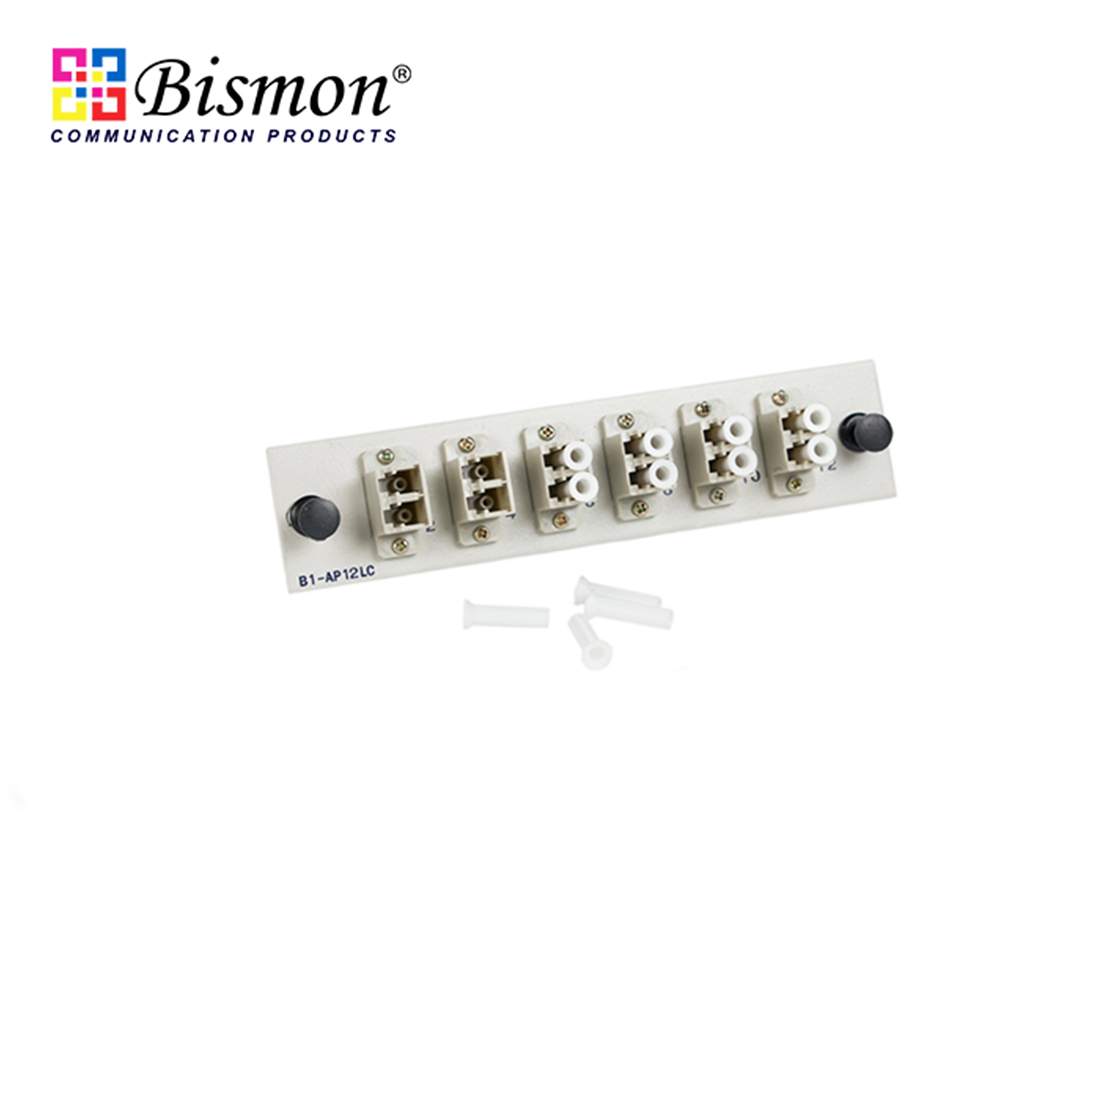 12-LC-Snap-in-adapter-Plate-Multi-mode-Full-set